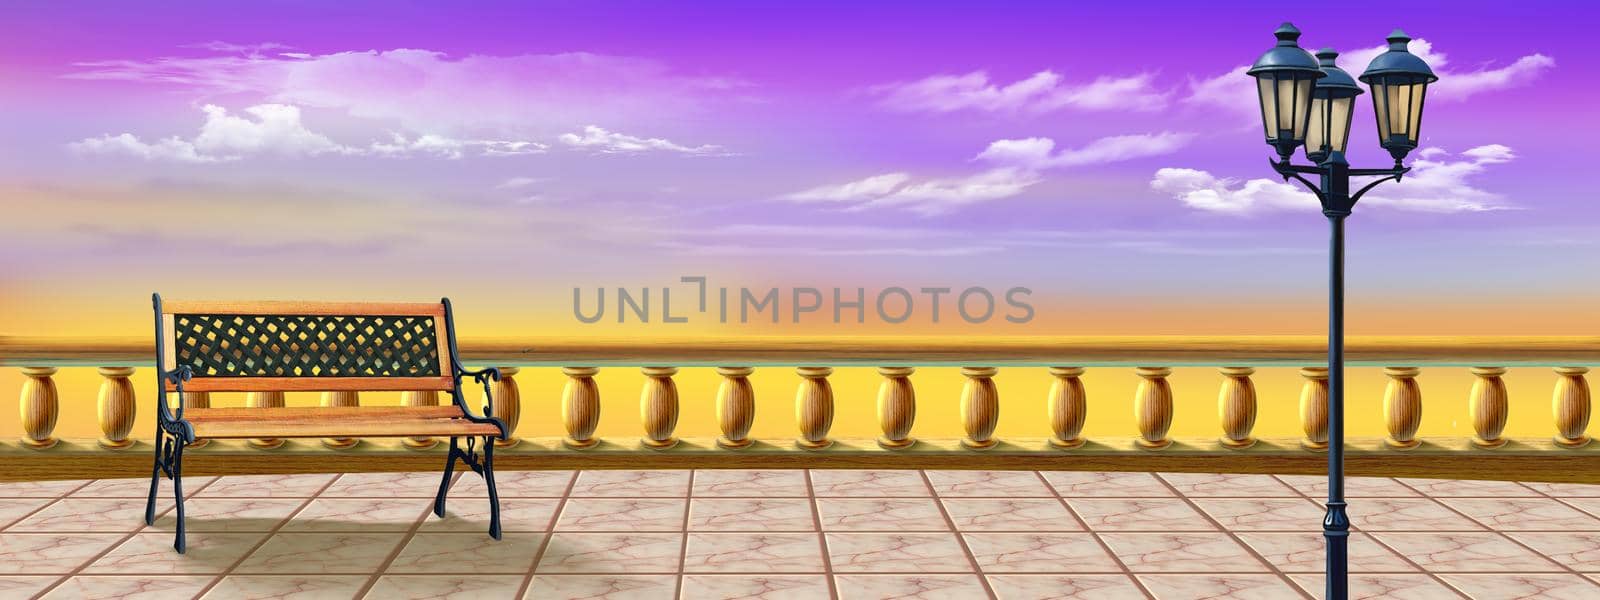 Sunrise view from the paving slab observation deck with bench and street lamp. Digital Painting Background, Illustration.